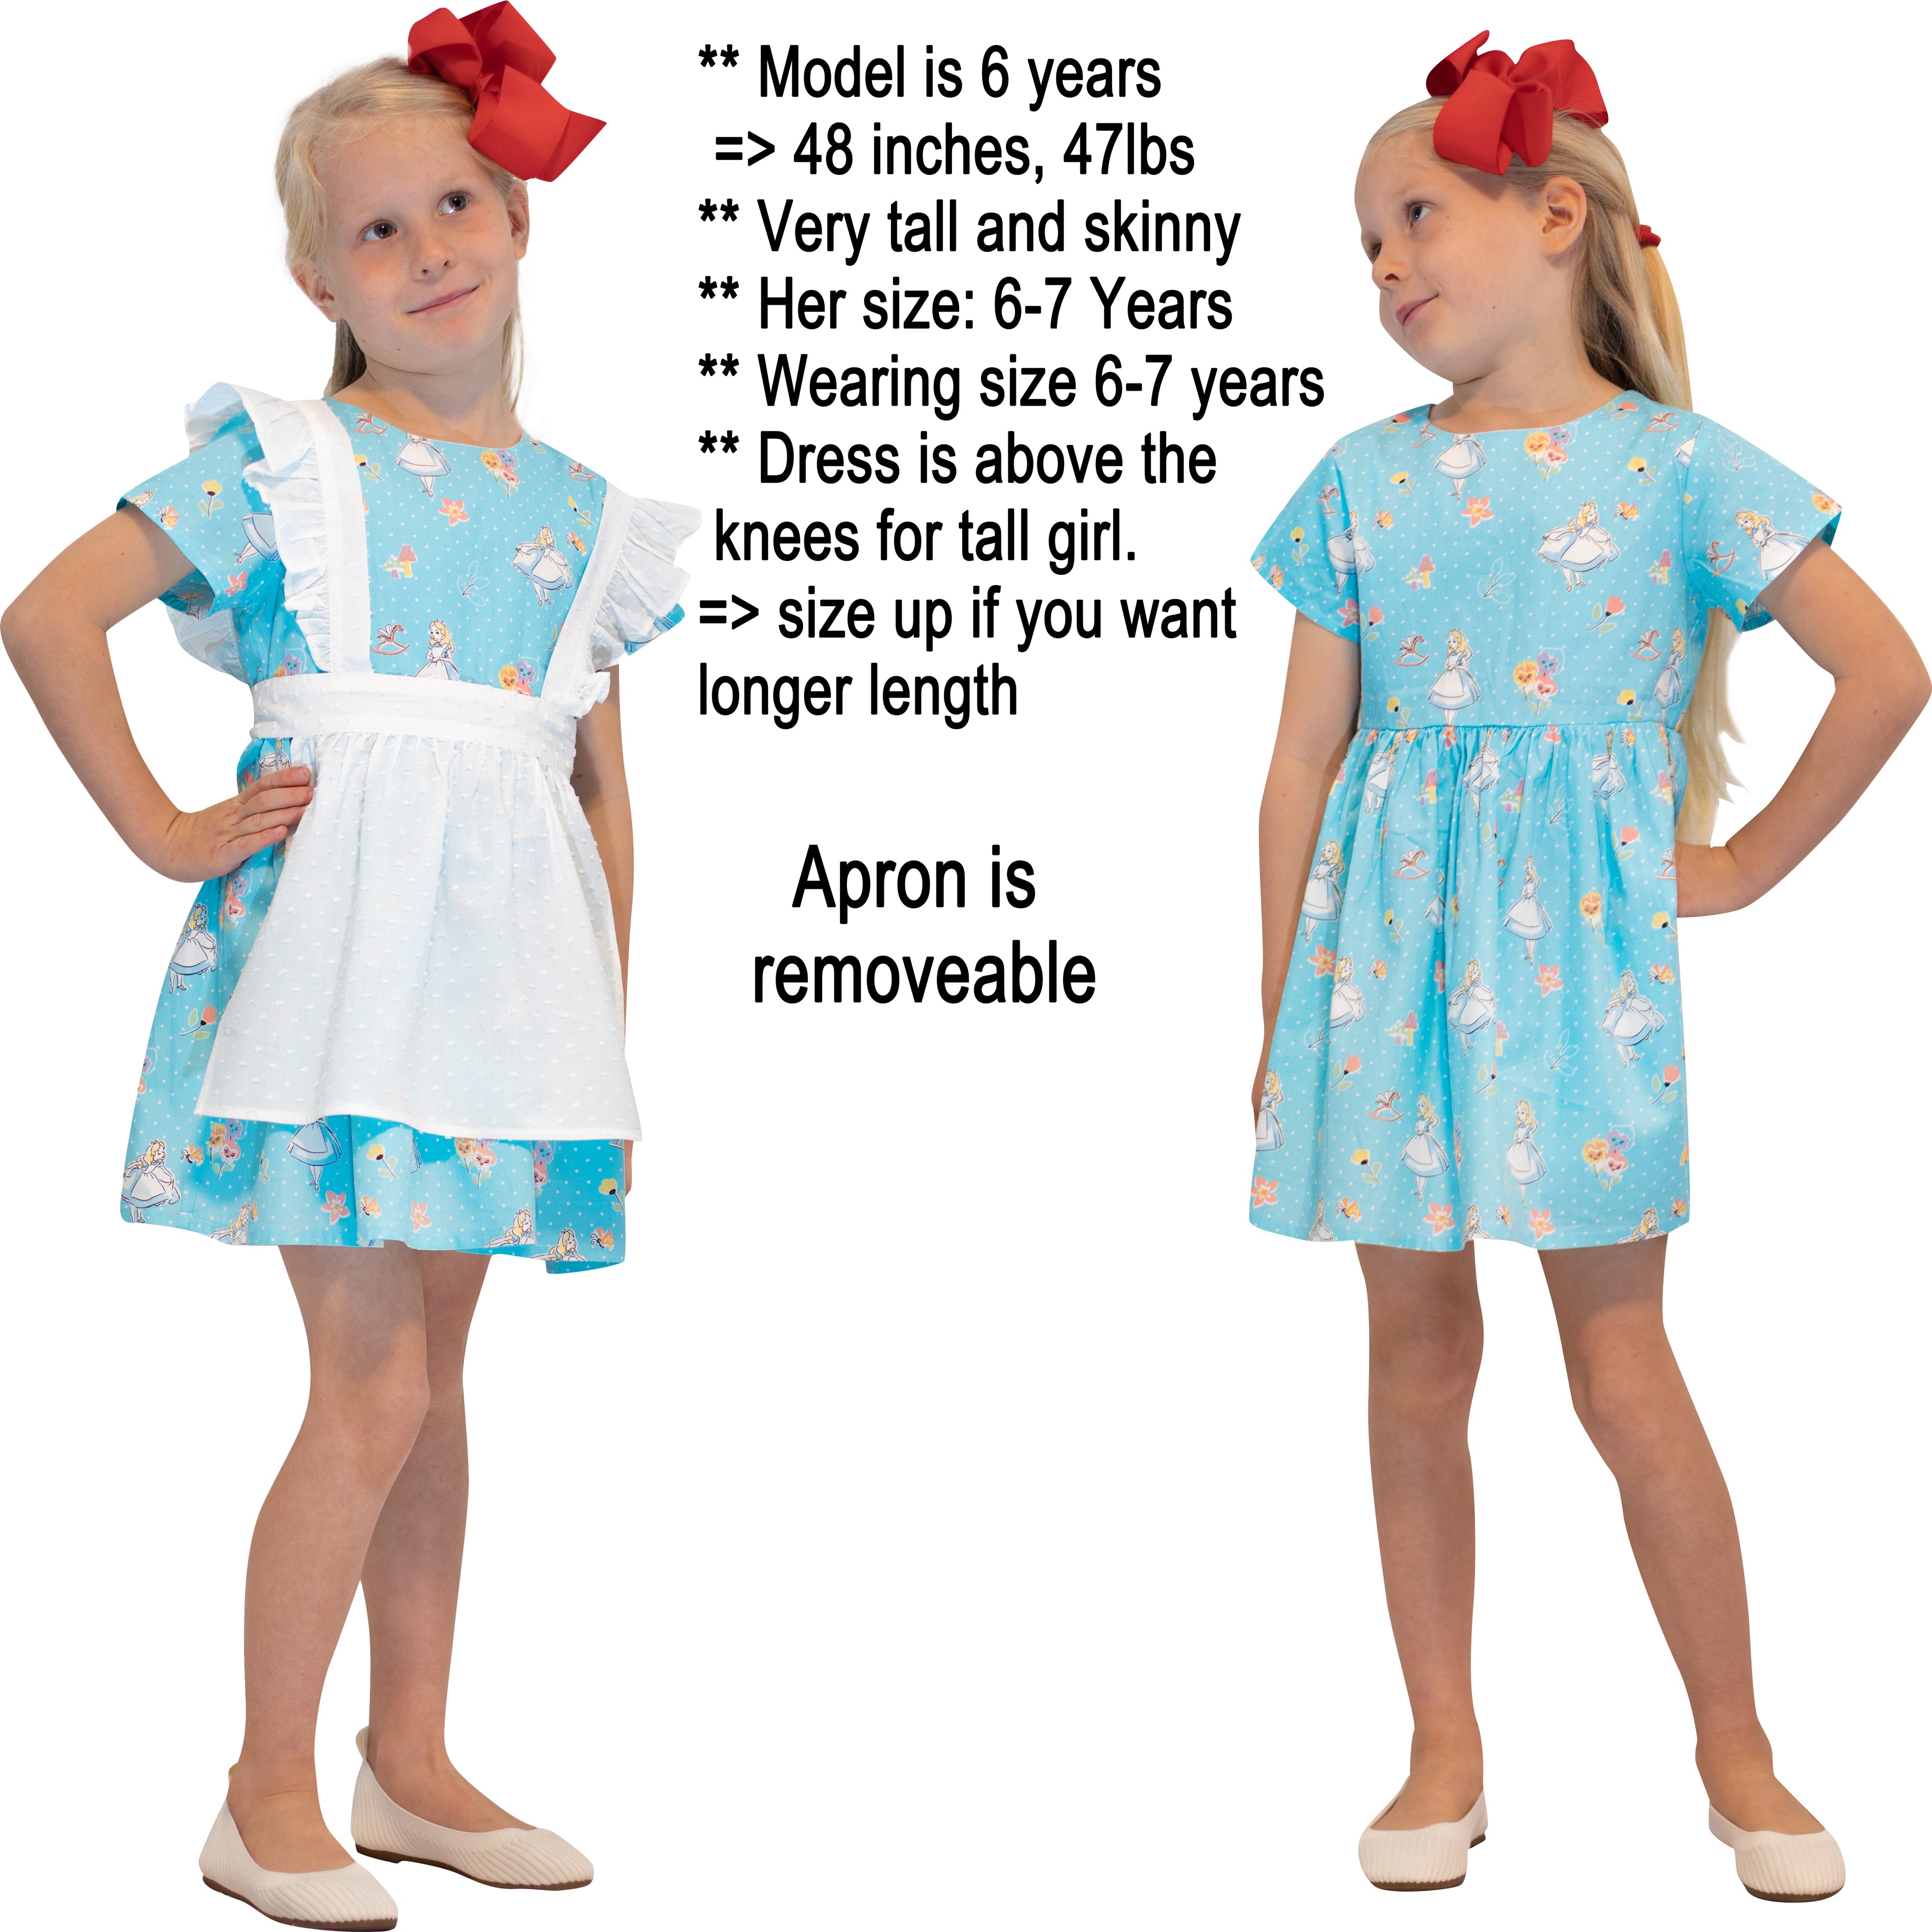 Baby Toddler Little Girls Story Time Character Alice In Wonderland Pinafore Apron Dress - White Blue - Angeline Kids